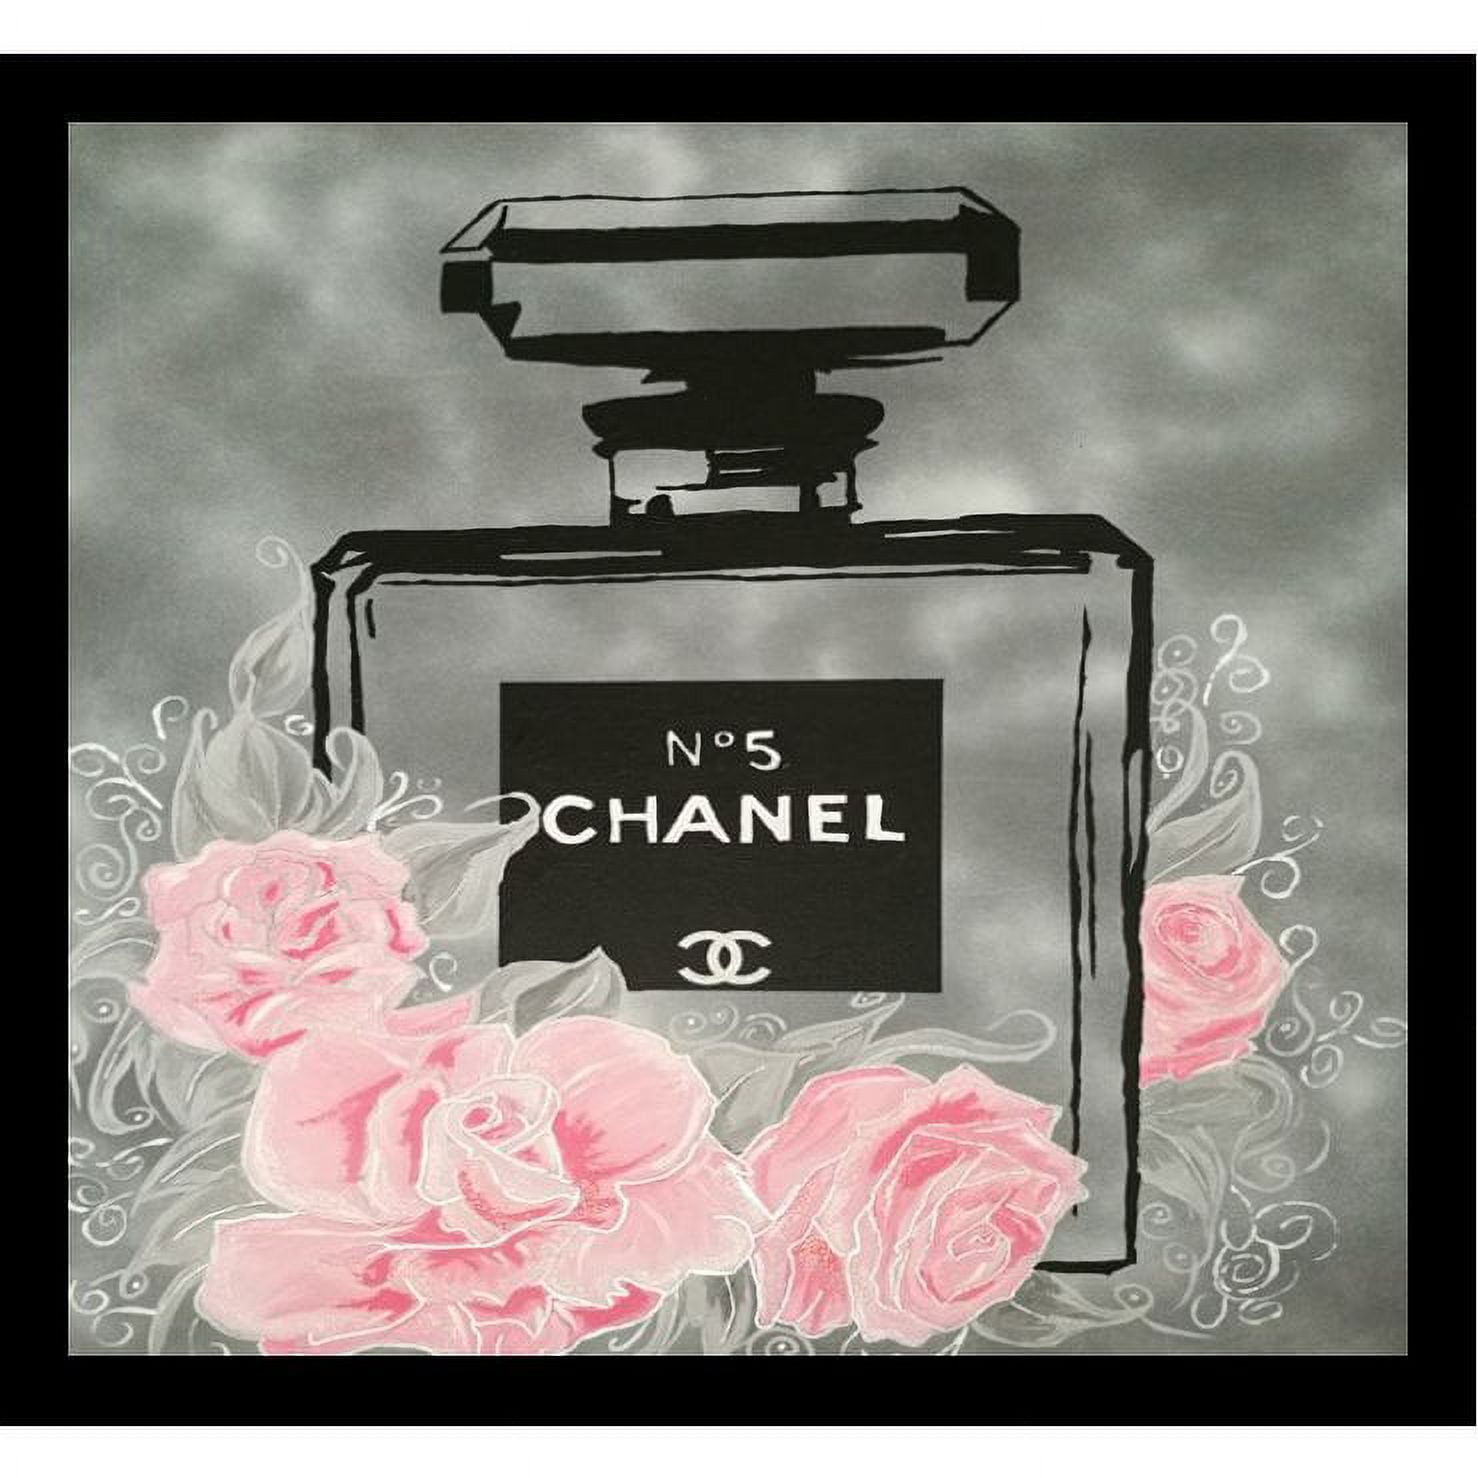 Buy Art for Less 'Pink Roses Floral Chanel No. 5' Framed Painting Print - Size: 18 H x 18 W x 1 D